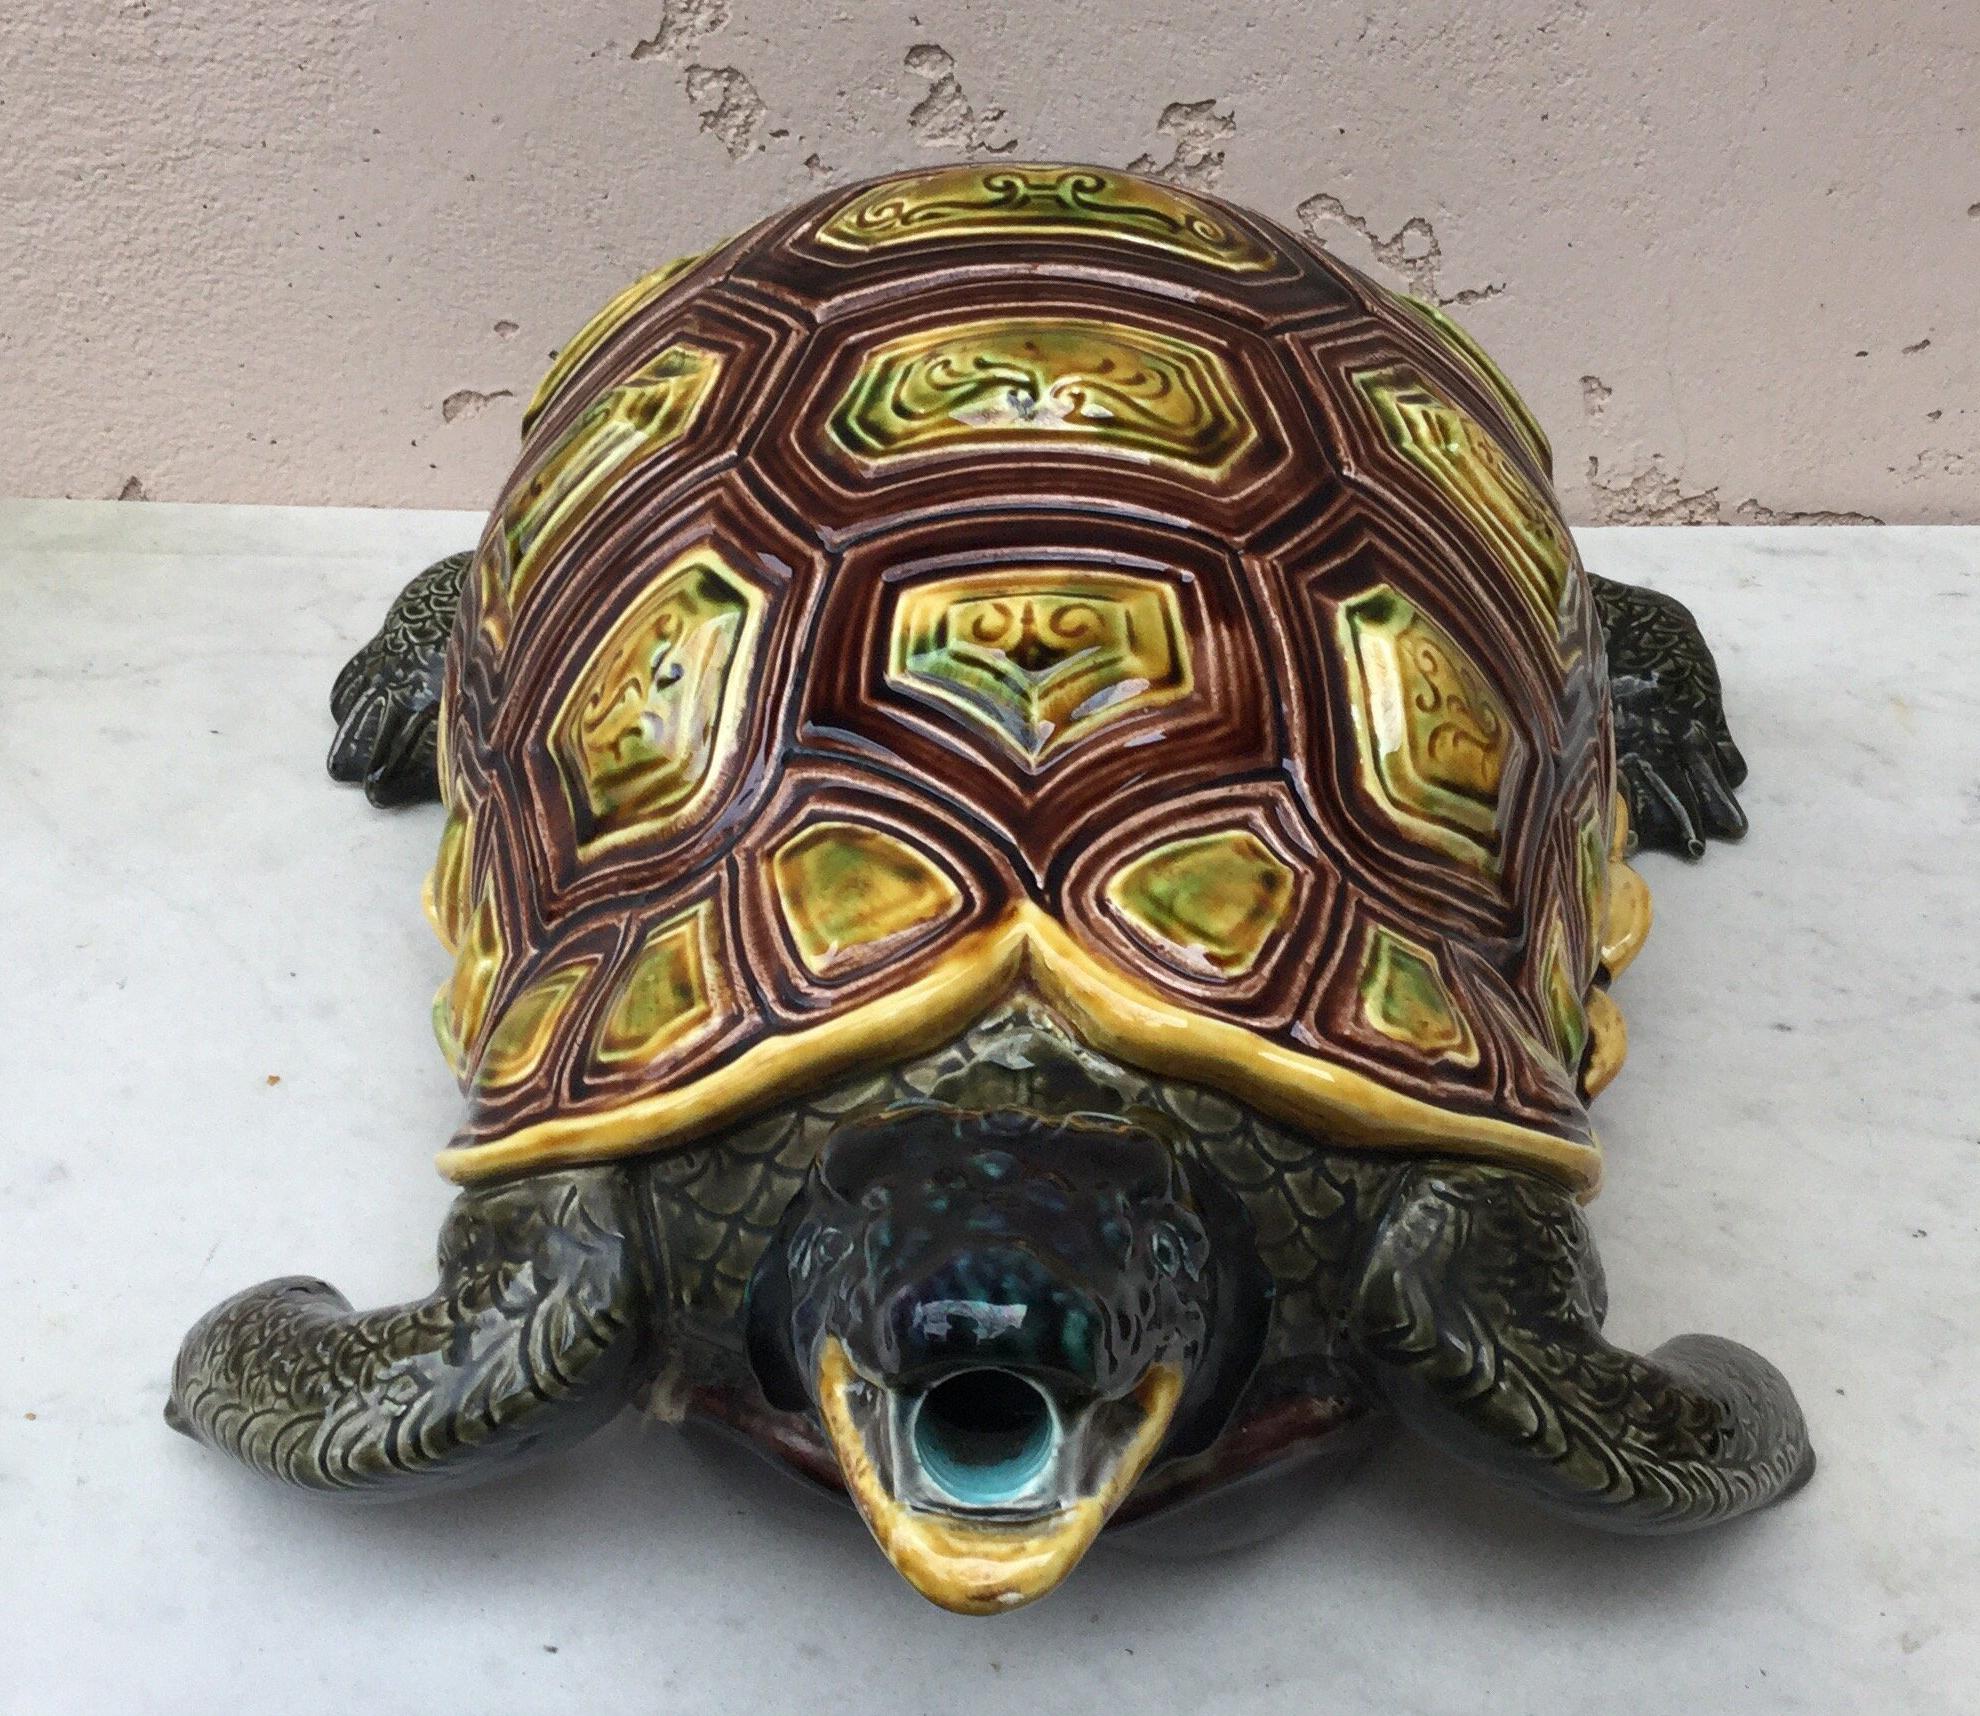 Large Majolica turtle fountain signed Sarreguemines, circa 1890.
Form 913.
At the end of 19th century it's not unusual to find in the rich houses this wall fountains.